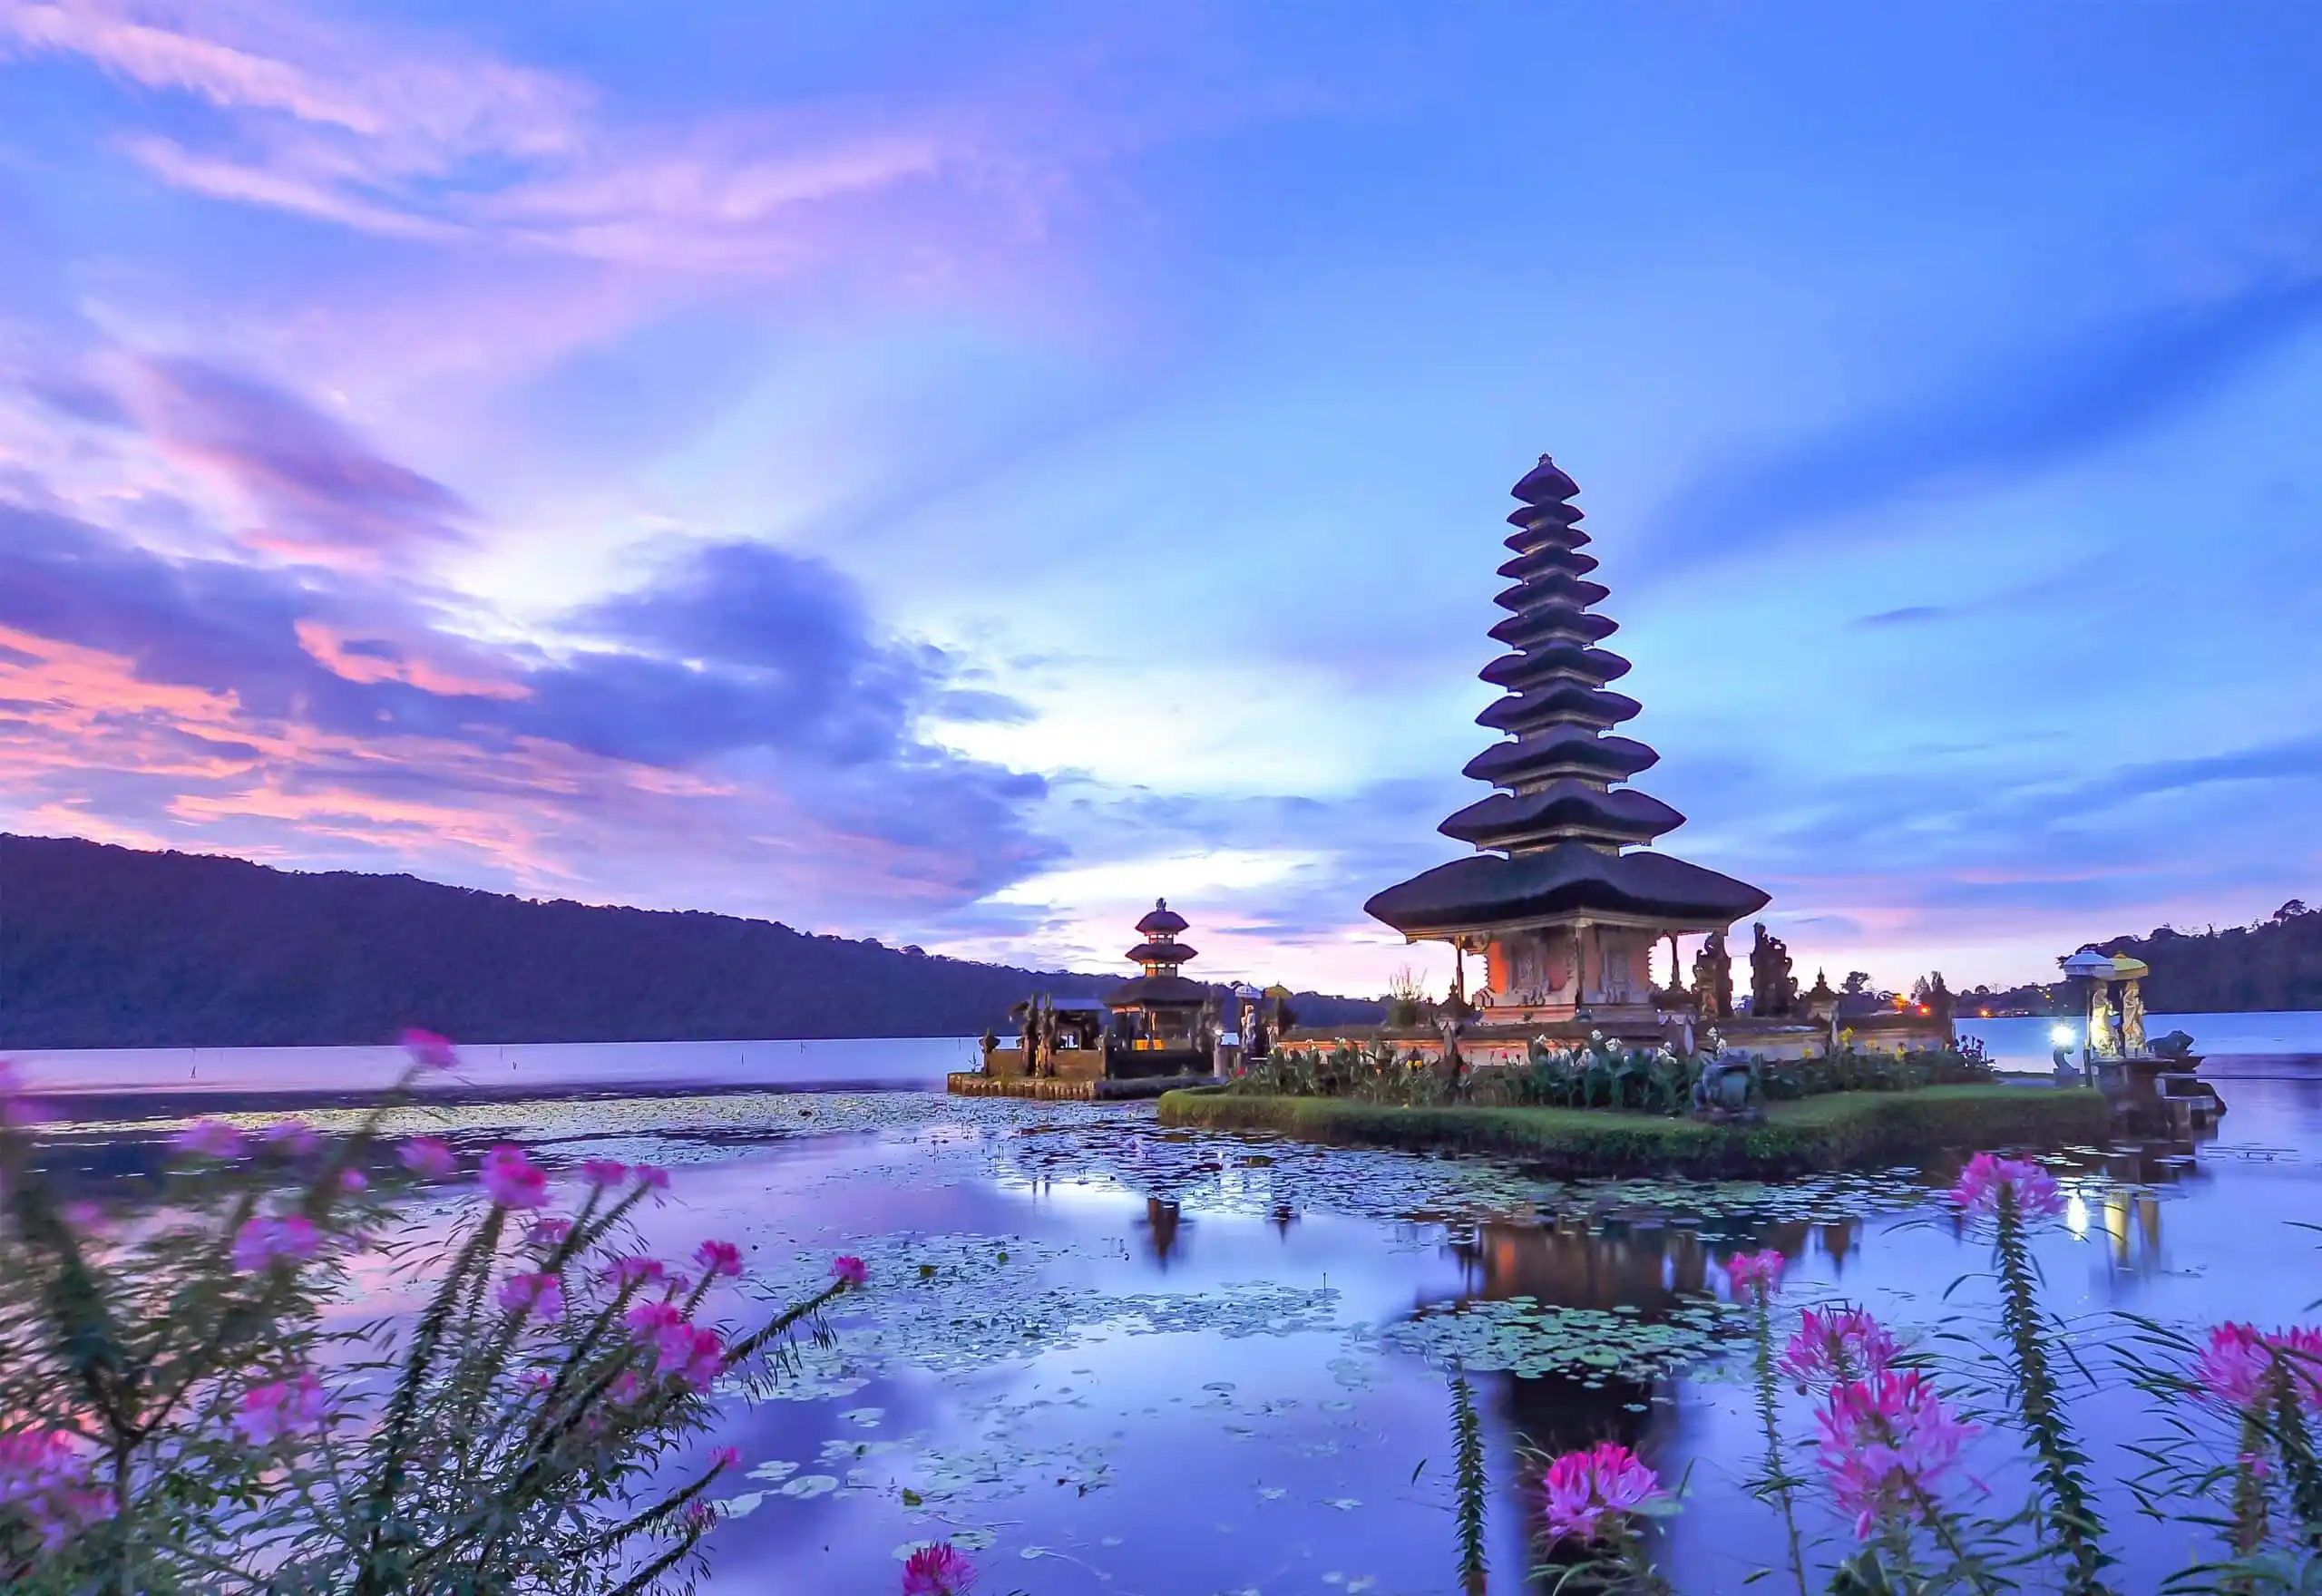 Construction and Civil Engineering Training Courses in Bali